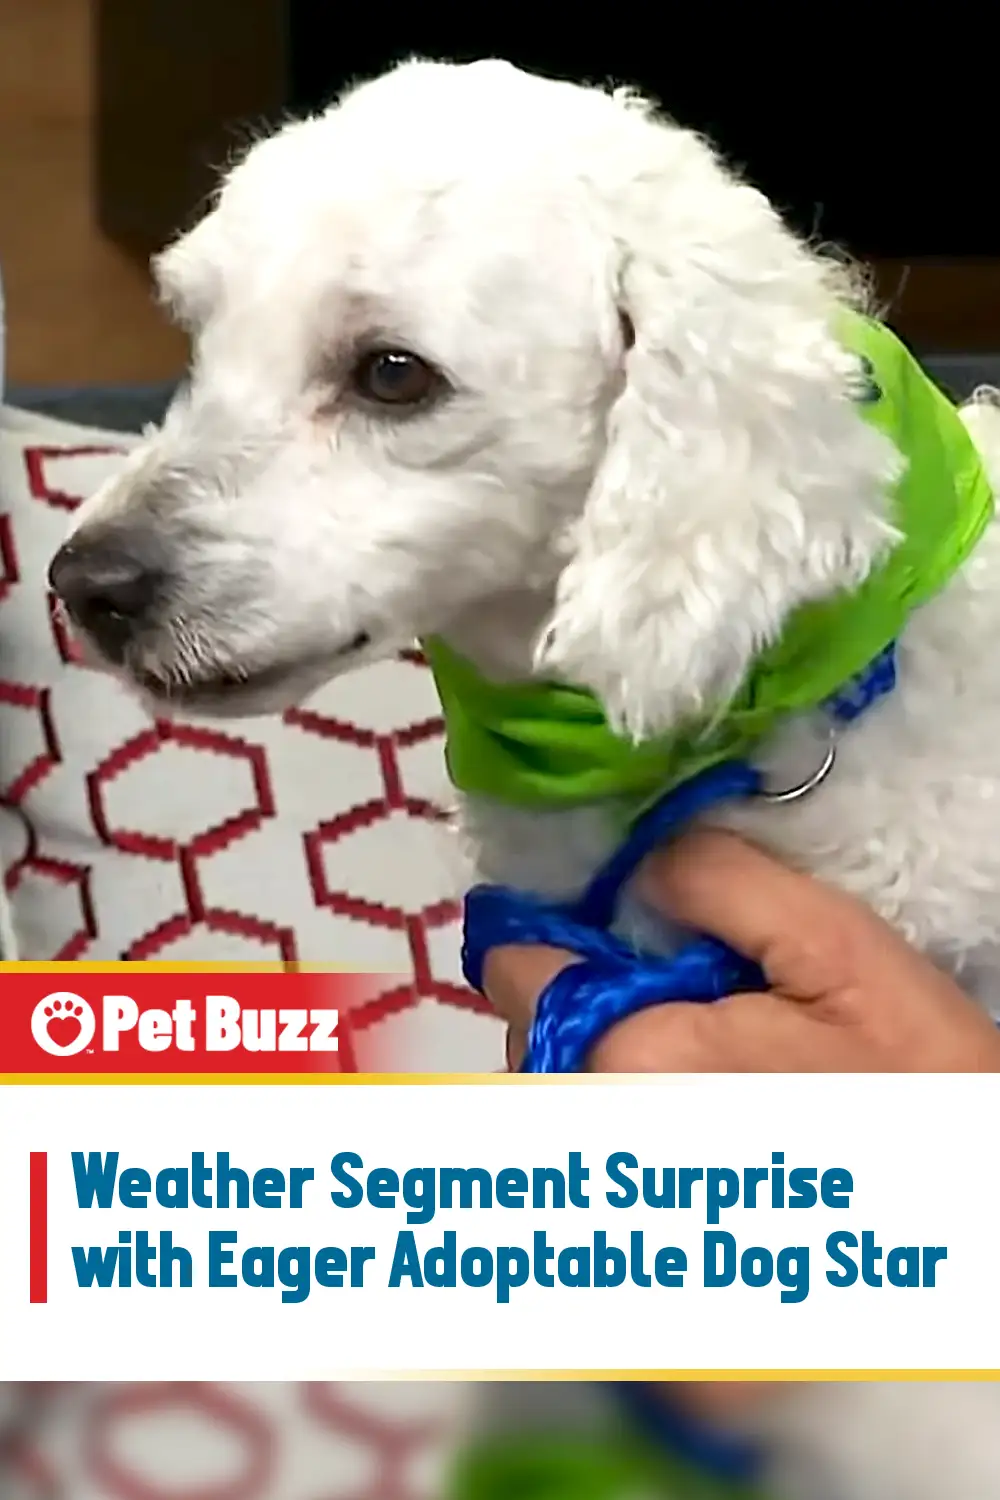 Weather Segment Surprise with Eager Adoptable Dog Star